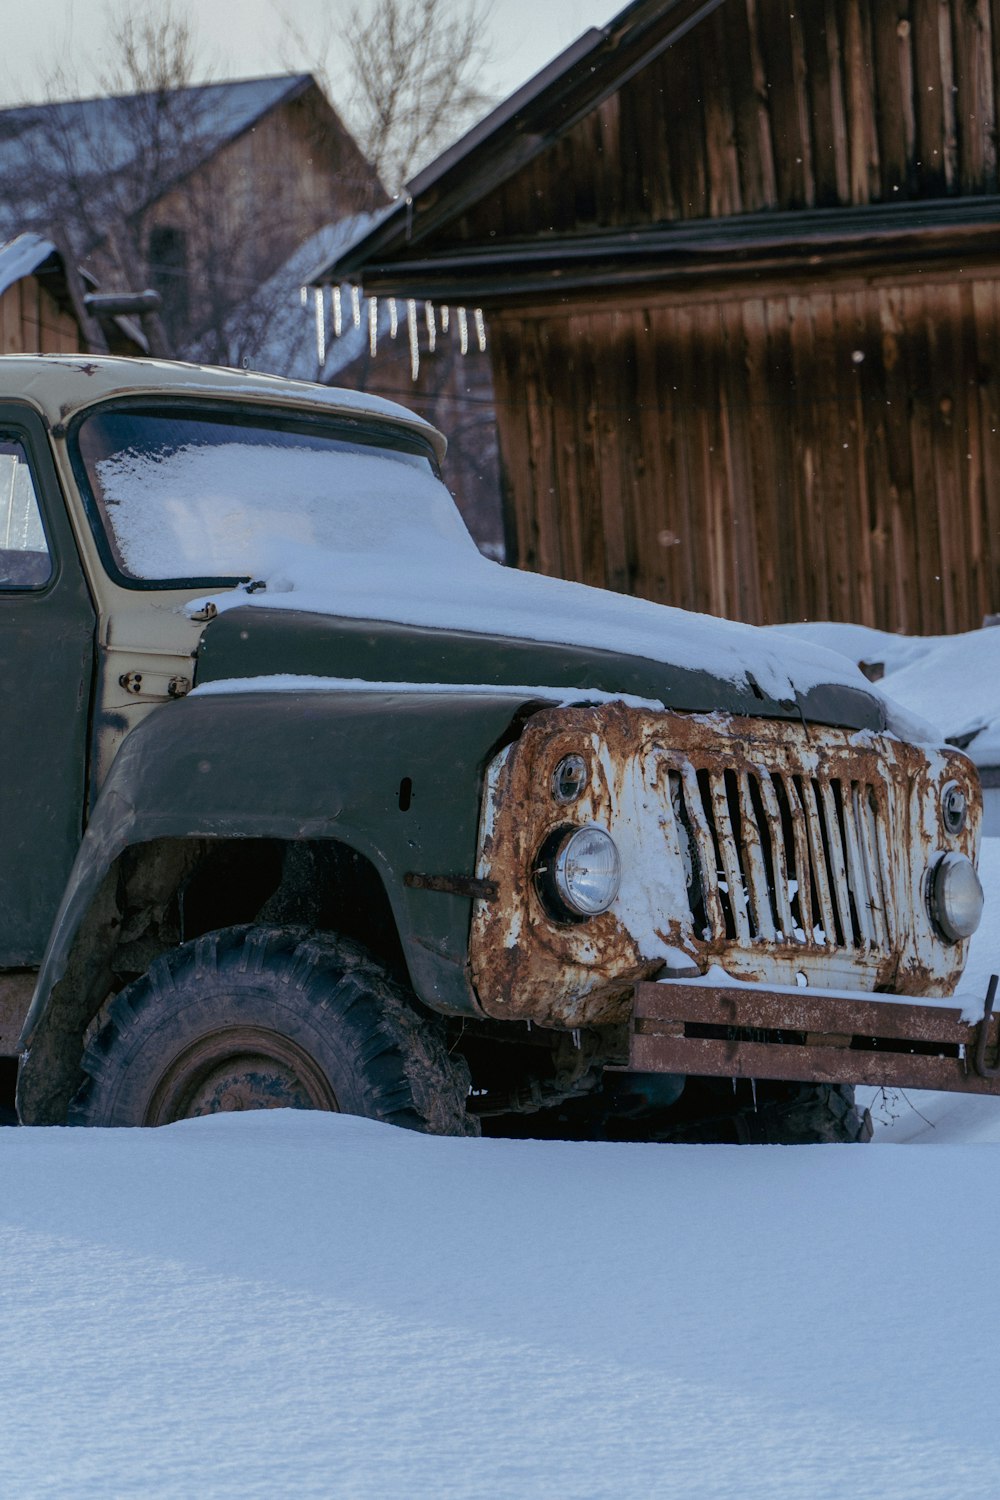 an old green truck is parked in the snow